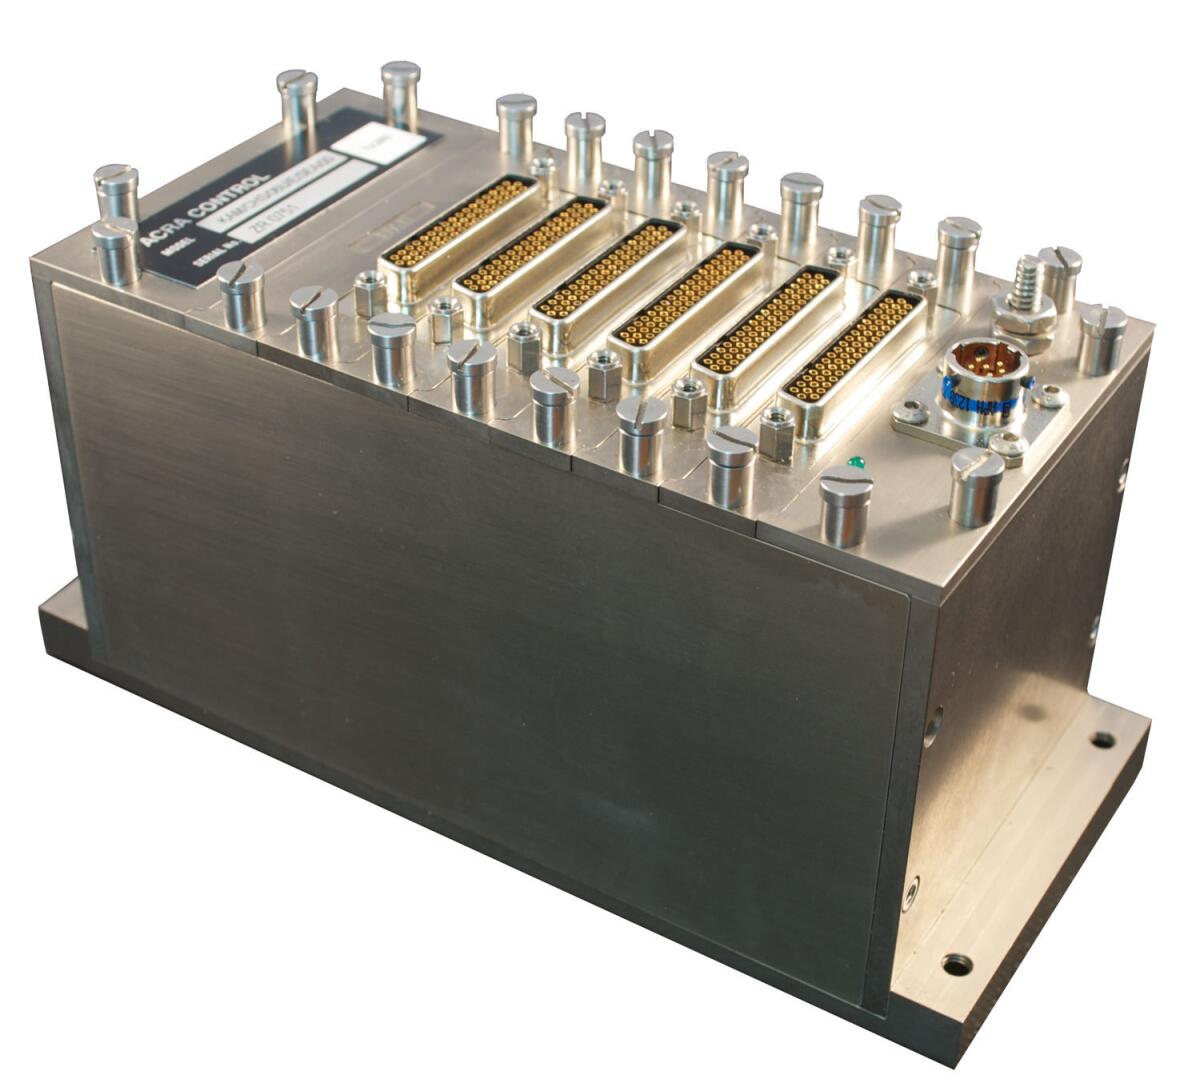 The Curtiss-Wright Space COTS KAM-500 box has been used for sensor data acquisition on space vehicles by SpaceX, Boeing, United Launch Alliance and the European Space Agency. (Curtiss-Wright)